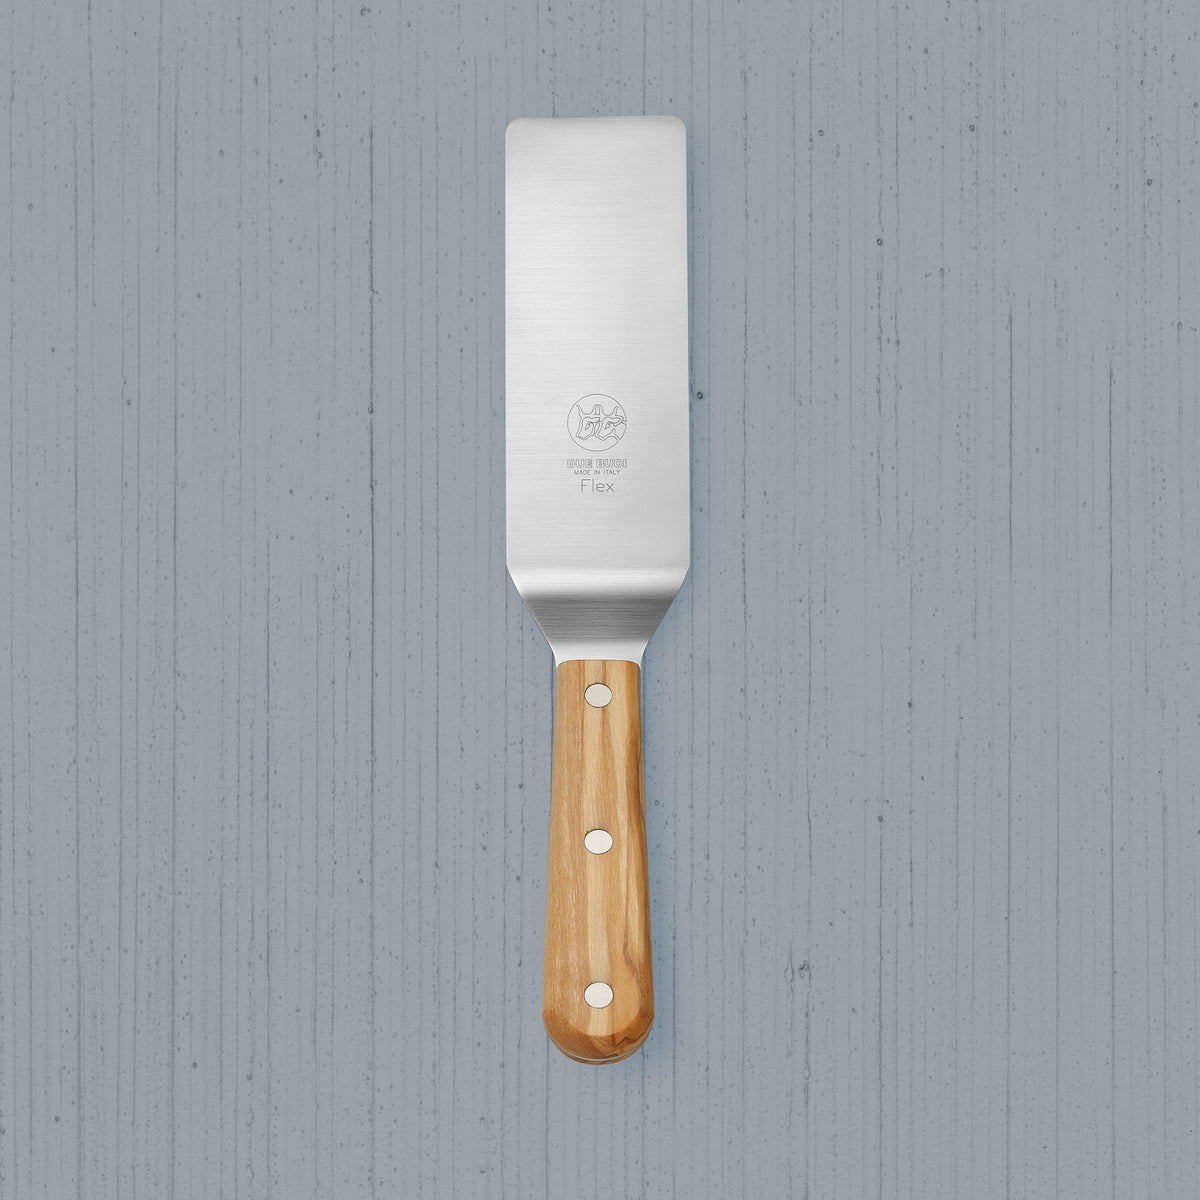 Due Buoi Offset Stainless Steel Icing Spatula